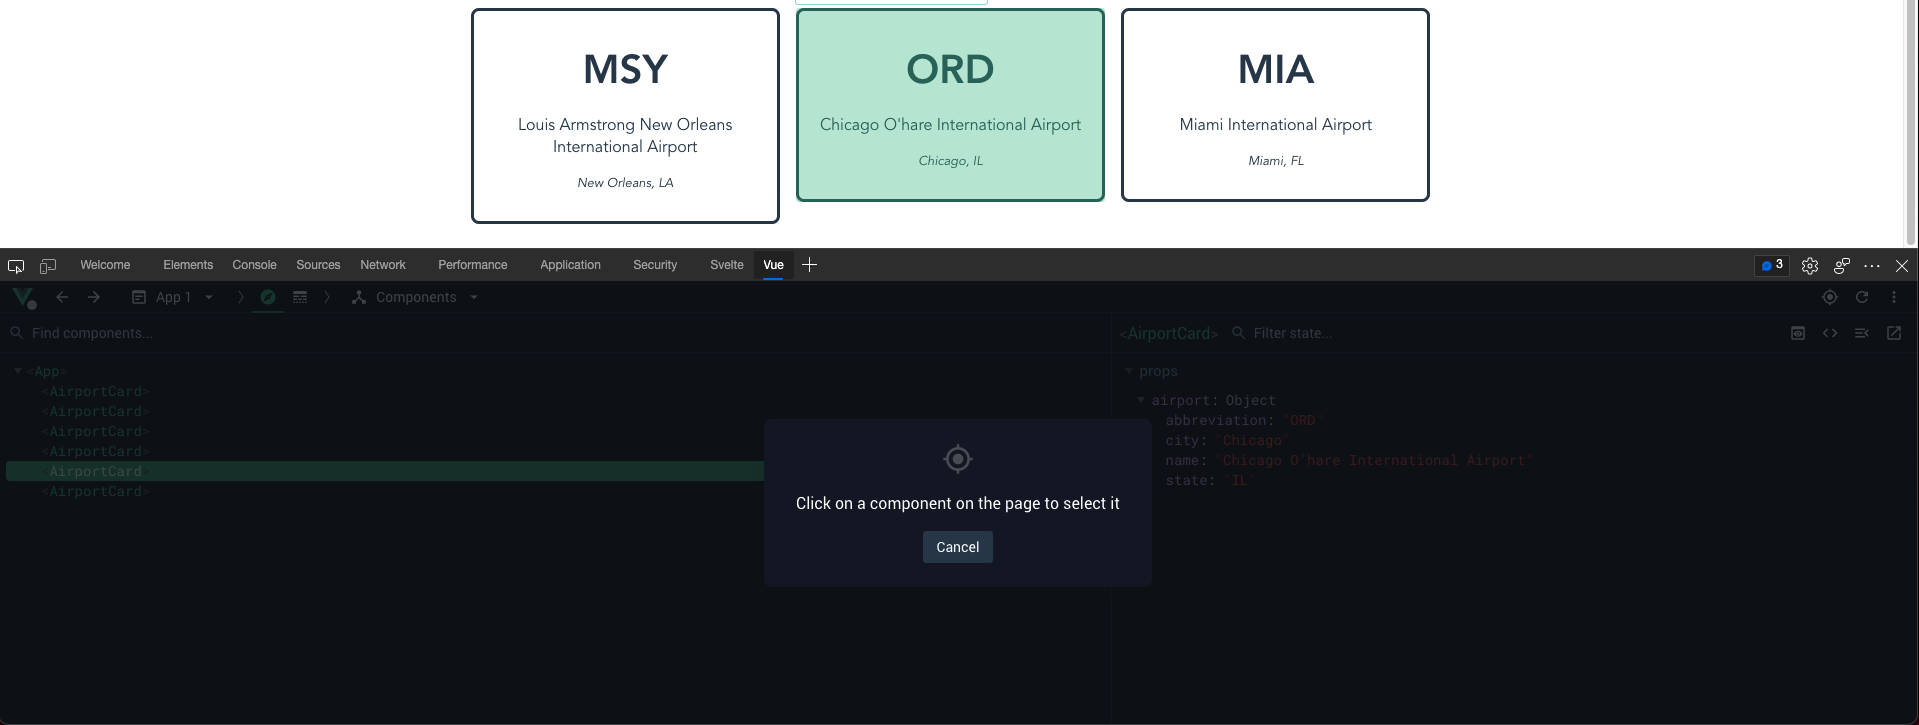 Vue.js Devtools open, with the "ORD" AirportCard component selected.